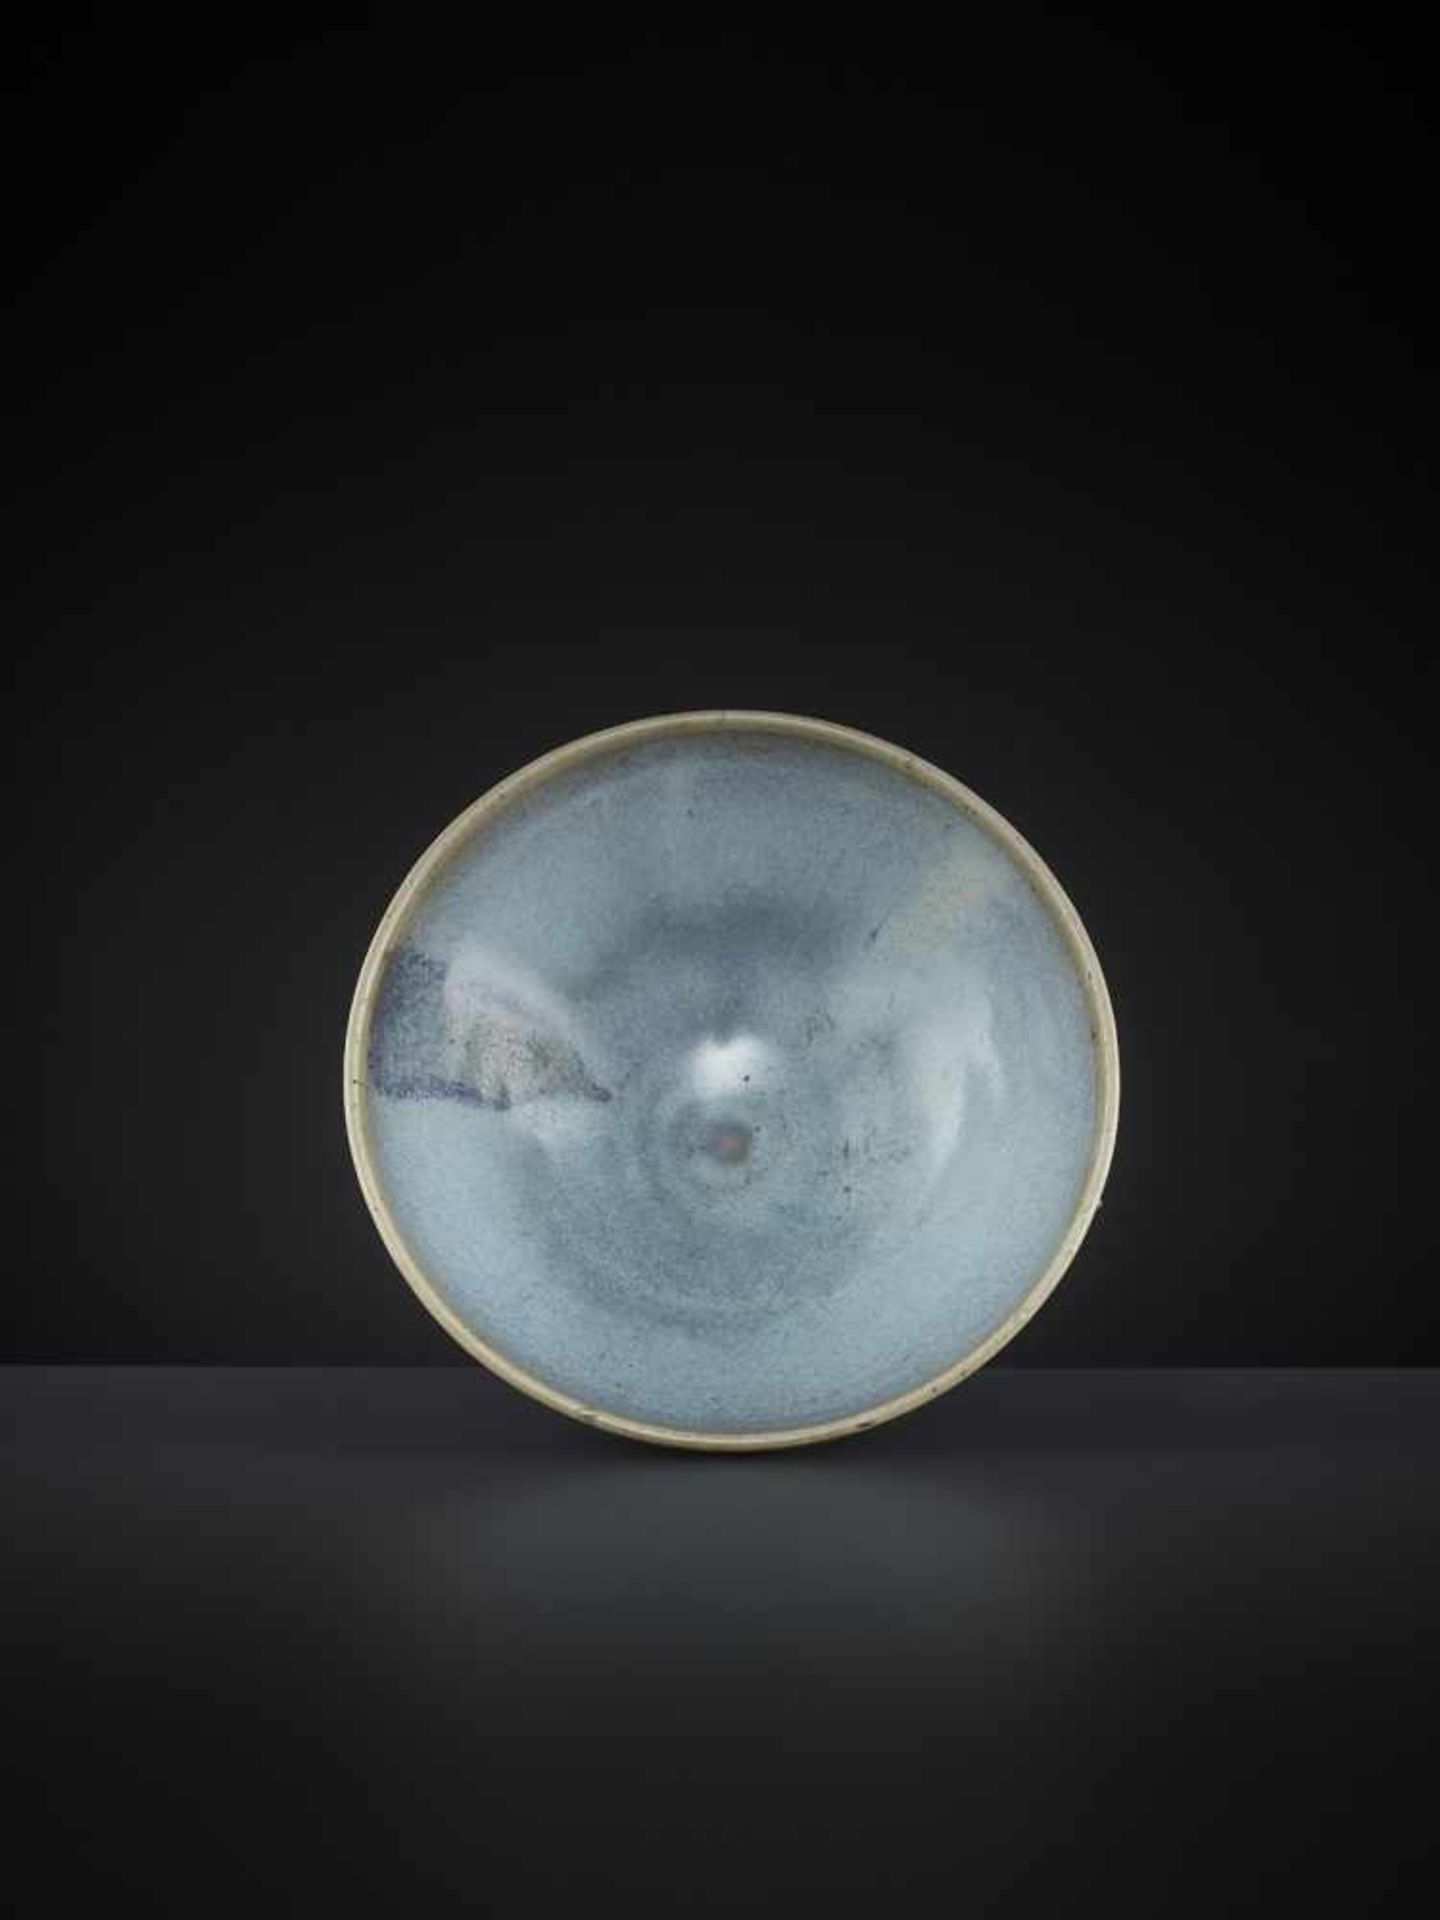 A JUNYAO CONICAL BOWL, 13TH-14TH CENTURY - Image 2 of 13